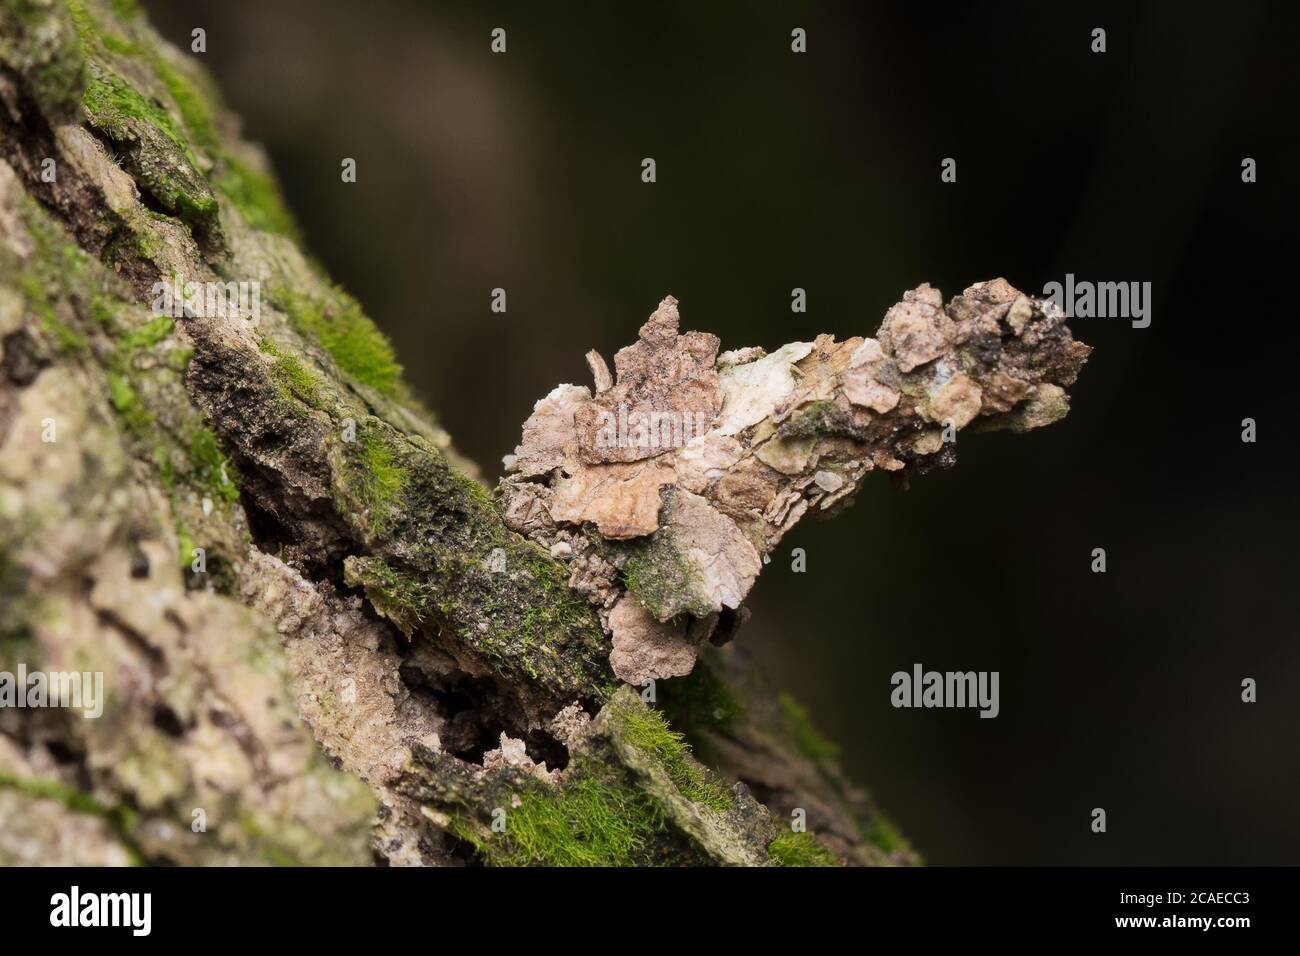 Fully Camouflaged bagworm moth caterpillar (Psychidae) on bark of tree Stock Photo